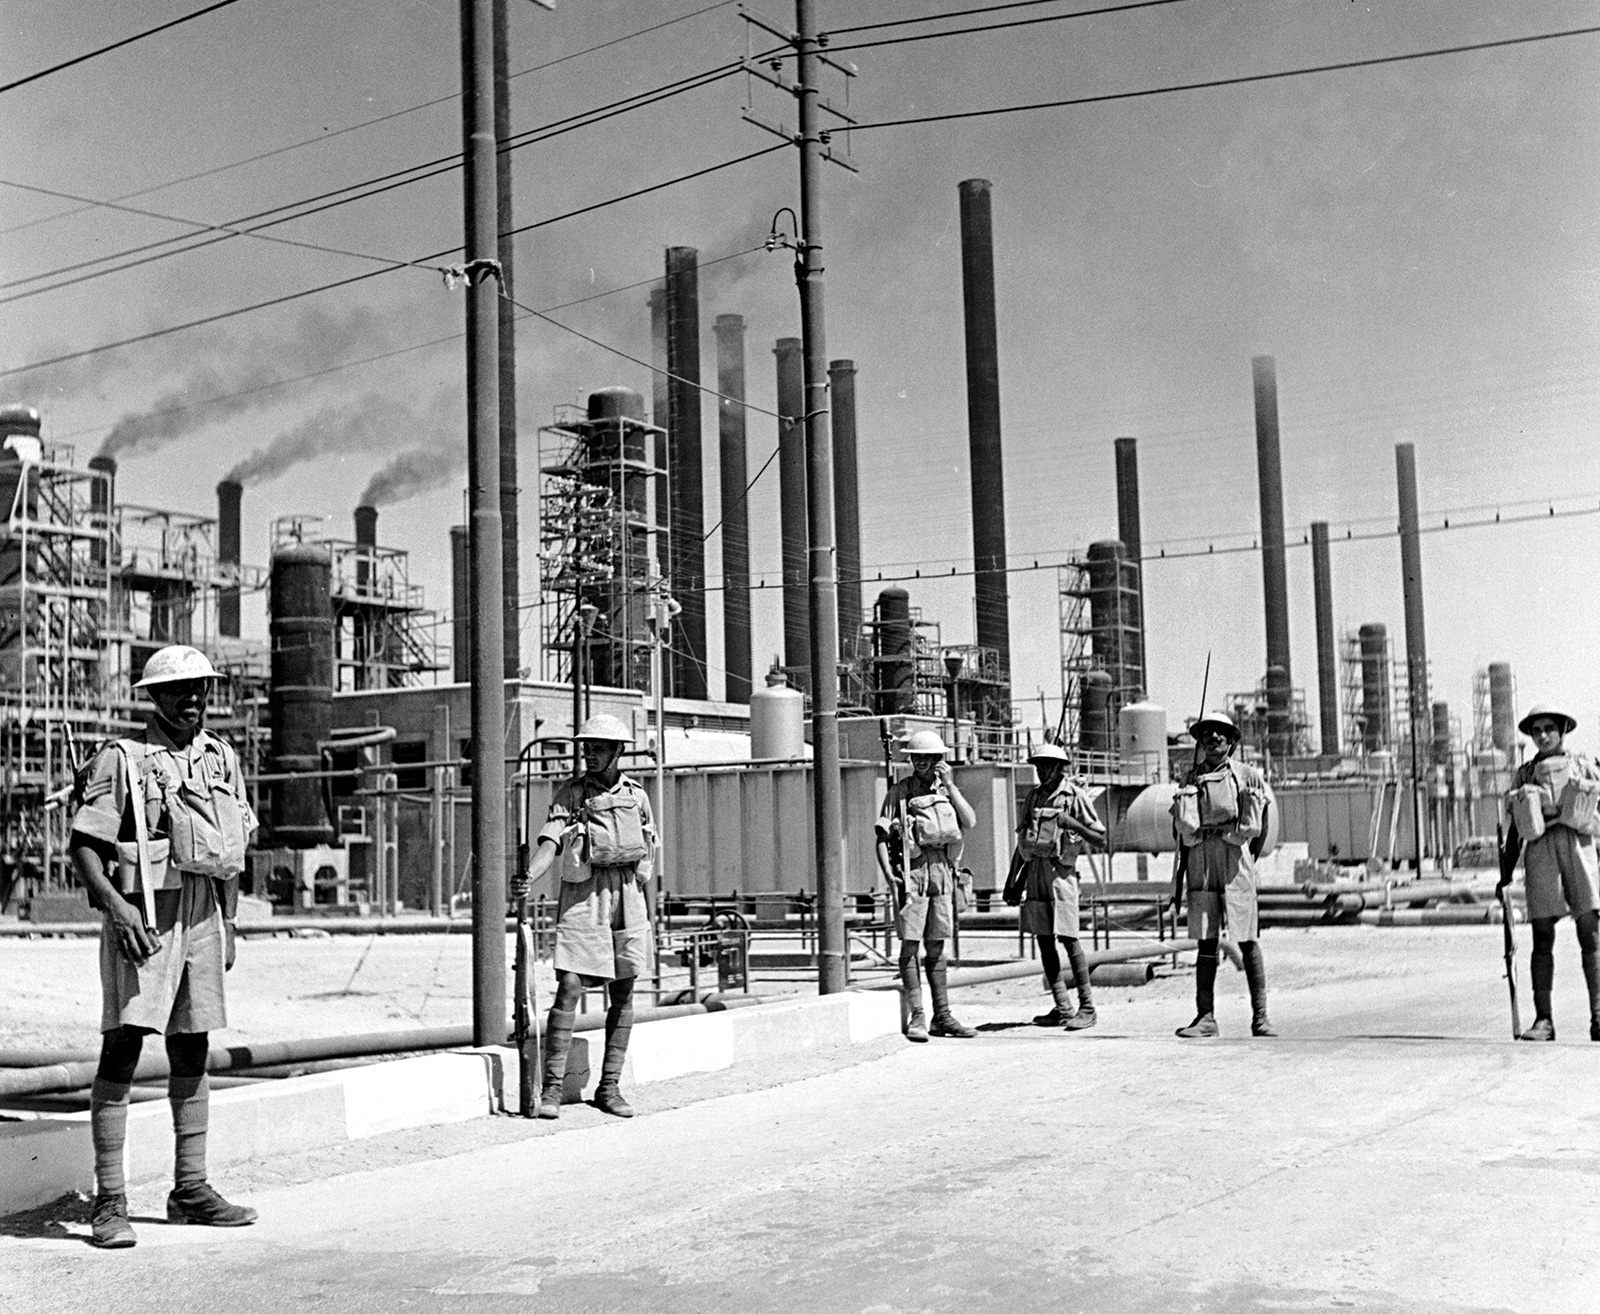 Indian riflemen guard a refinery belonging to the Anglo-Iranian Oil Company, 1940s.